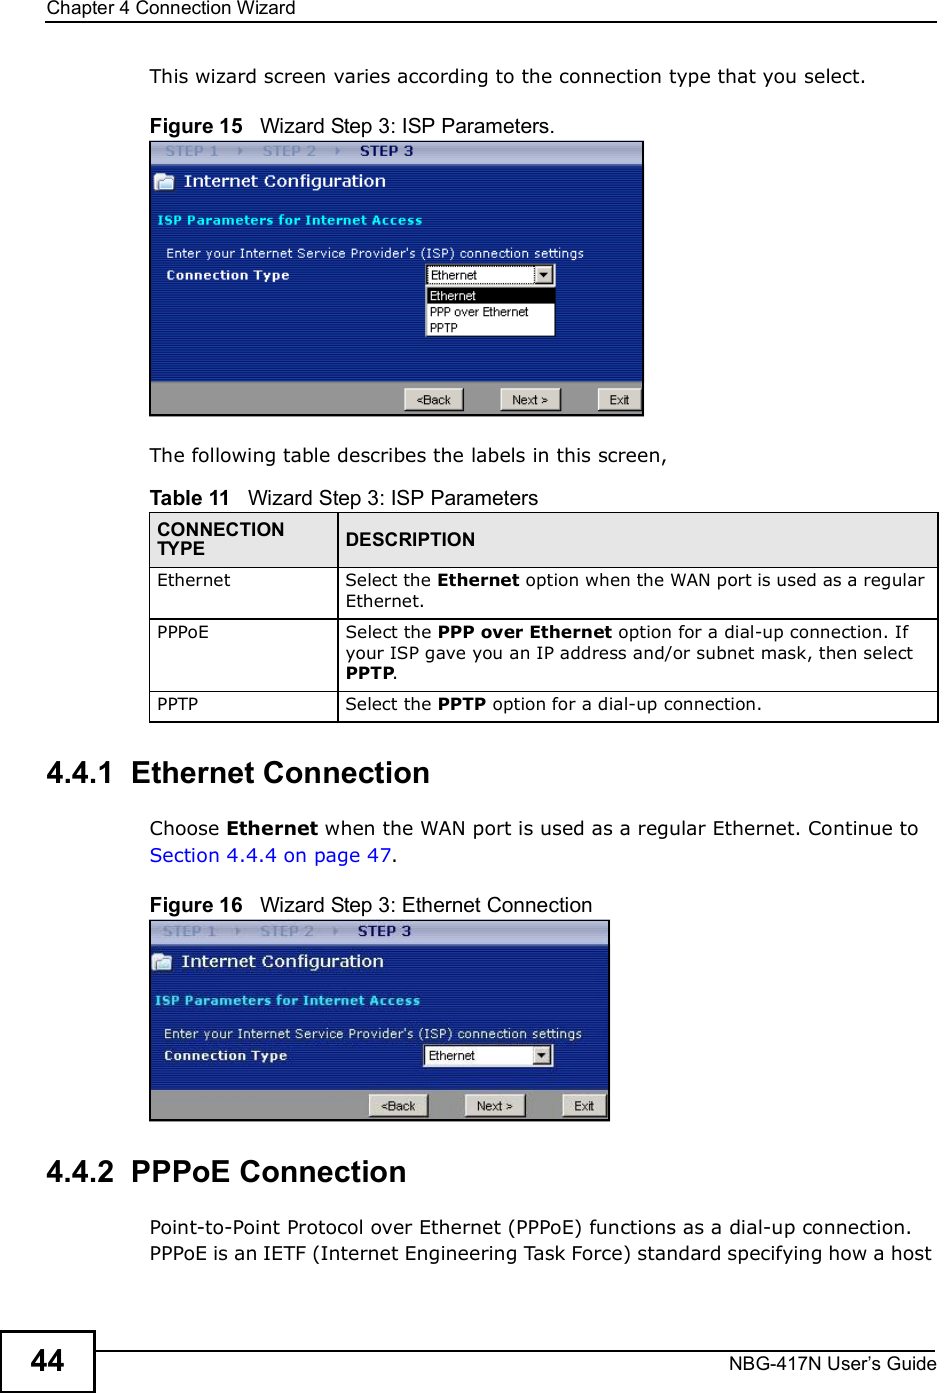 Chapter 4Connection WizardNBG-417N User s Guide44This wizard screen varies according to the connection type that you select.Figure 15   Wizard Step 3: ISP Parameters.The following table describes the labels in this screen,4.4.1  Ethernet ConnectionChoose Ethernet when the WAN port is used as a regular Ethernet. Continue to Section 4.4.4 on page 47.Figure 16   Wizard Step 3: Ethernet Connection4.4.2  PPPoE ConnectionPoint-to-Point Protocol over Ethernet (PPPoE) functions as a dial-up connection. PPPoE is an IETF (Internet Engineering Task Force) standard specifying how a host Table 11   Wizard Step 3: ISP ParametersCONNECTION TYPE DESCRIPTIONEthernetSelect the Ethernet option when the WAN port is used as a regular Ethernet. PPPoE Select the PPP over Ethernet option for a dial-up connection. If your ISP gave you an IP address and/or subnet mask, then select PPTP.PPTPSelect the PPTP option for a dial-up connection.